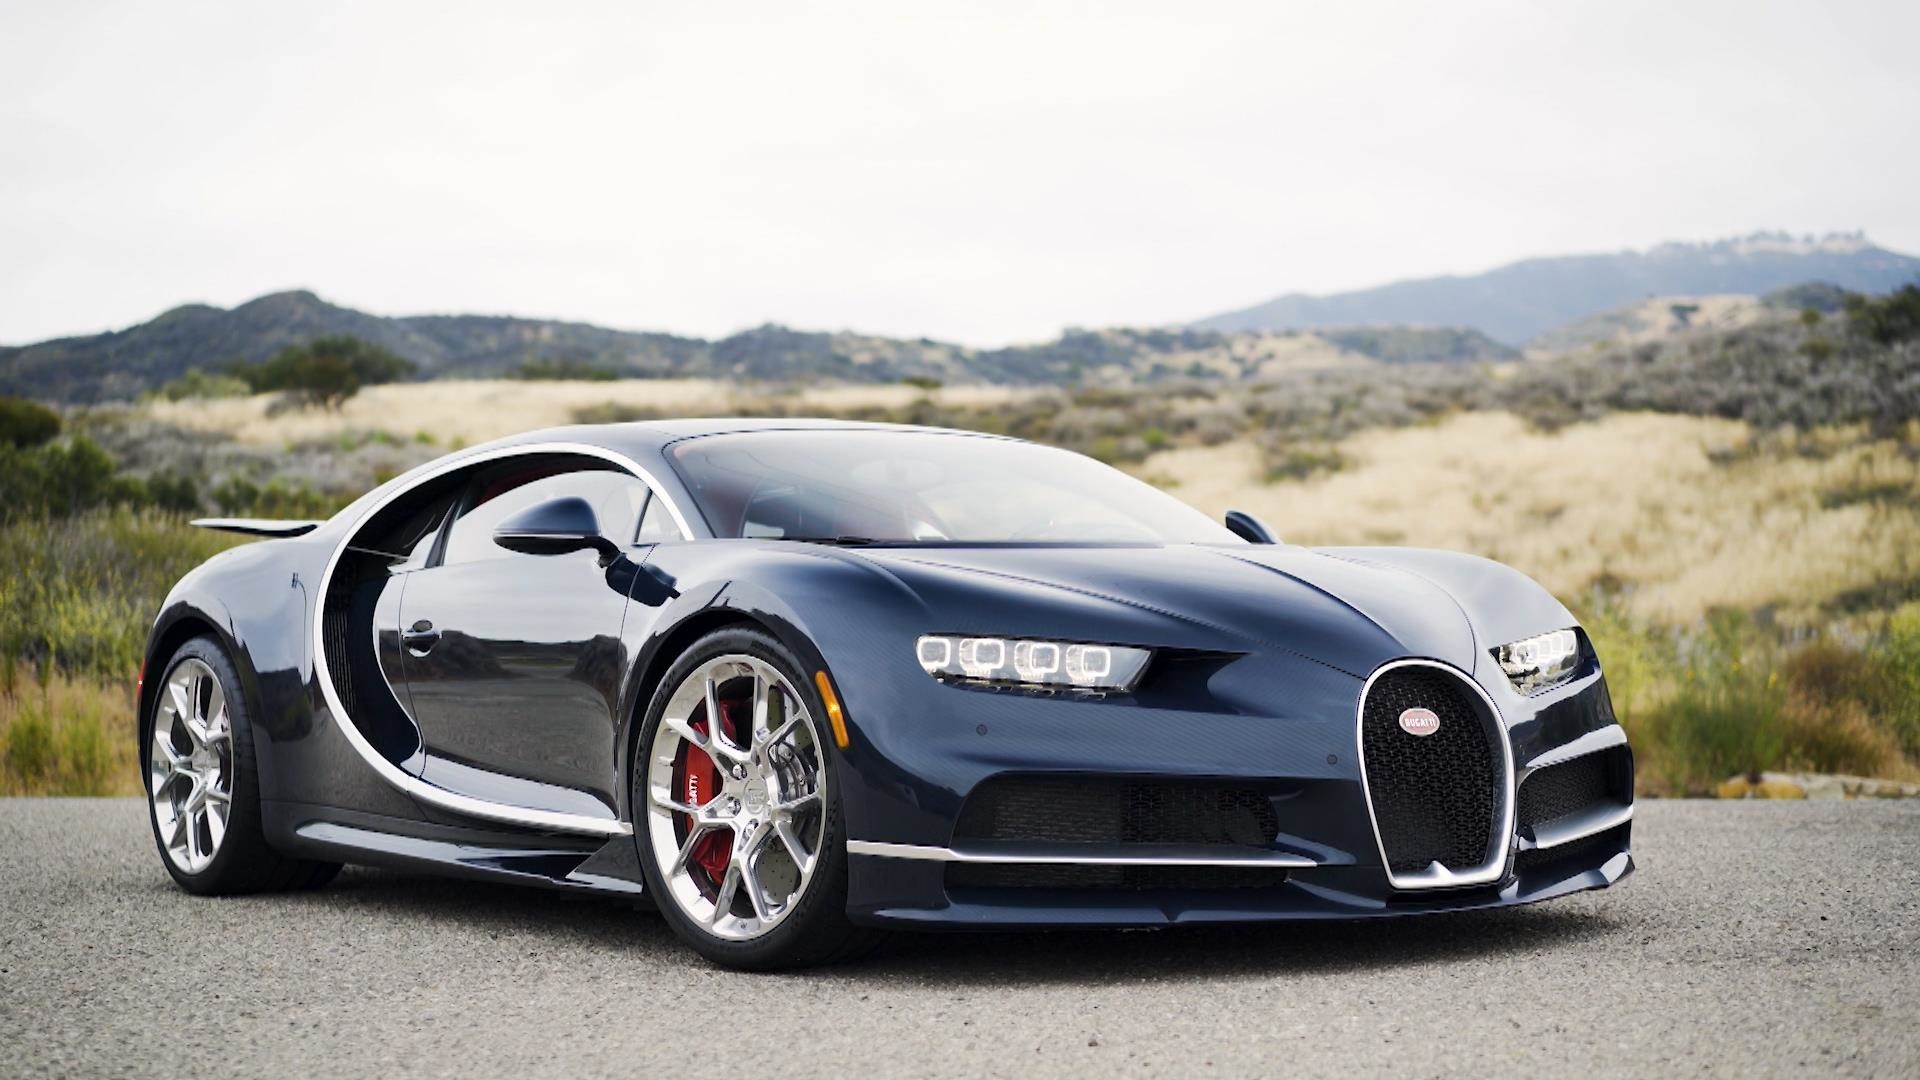 1920x1080 Behind The Wheel of A Bugatti Chiron, One of The Fastest Cars in The World